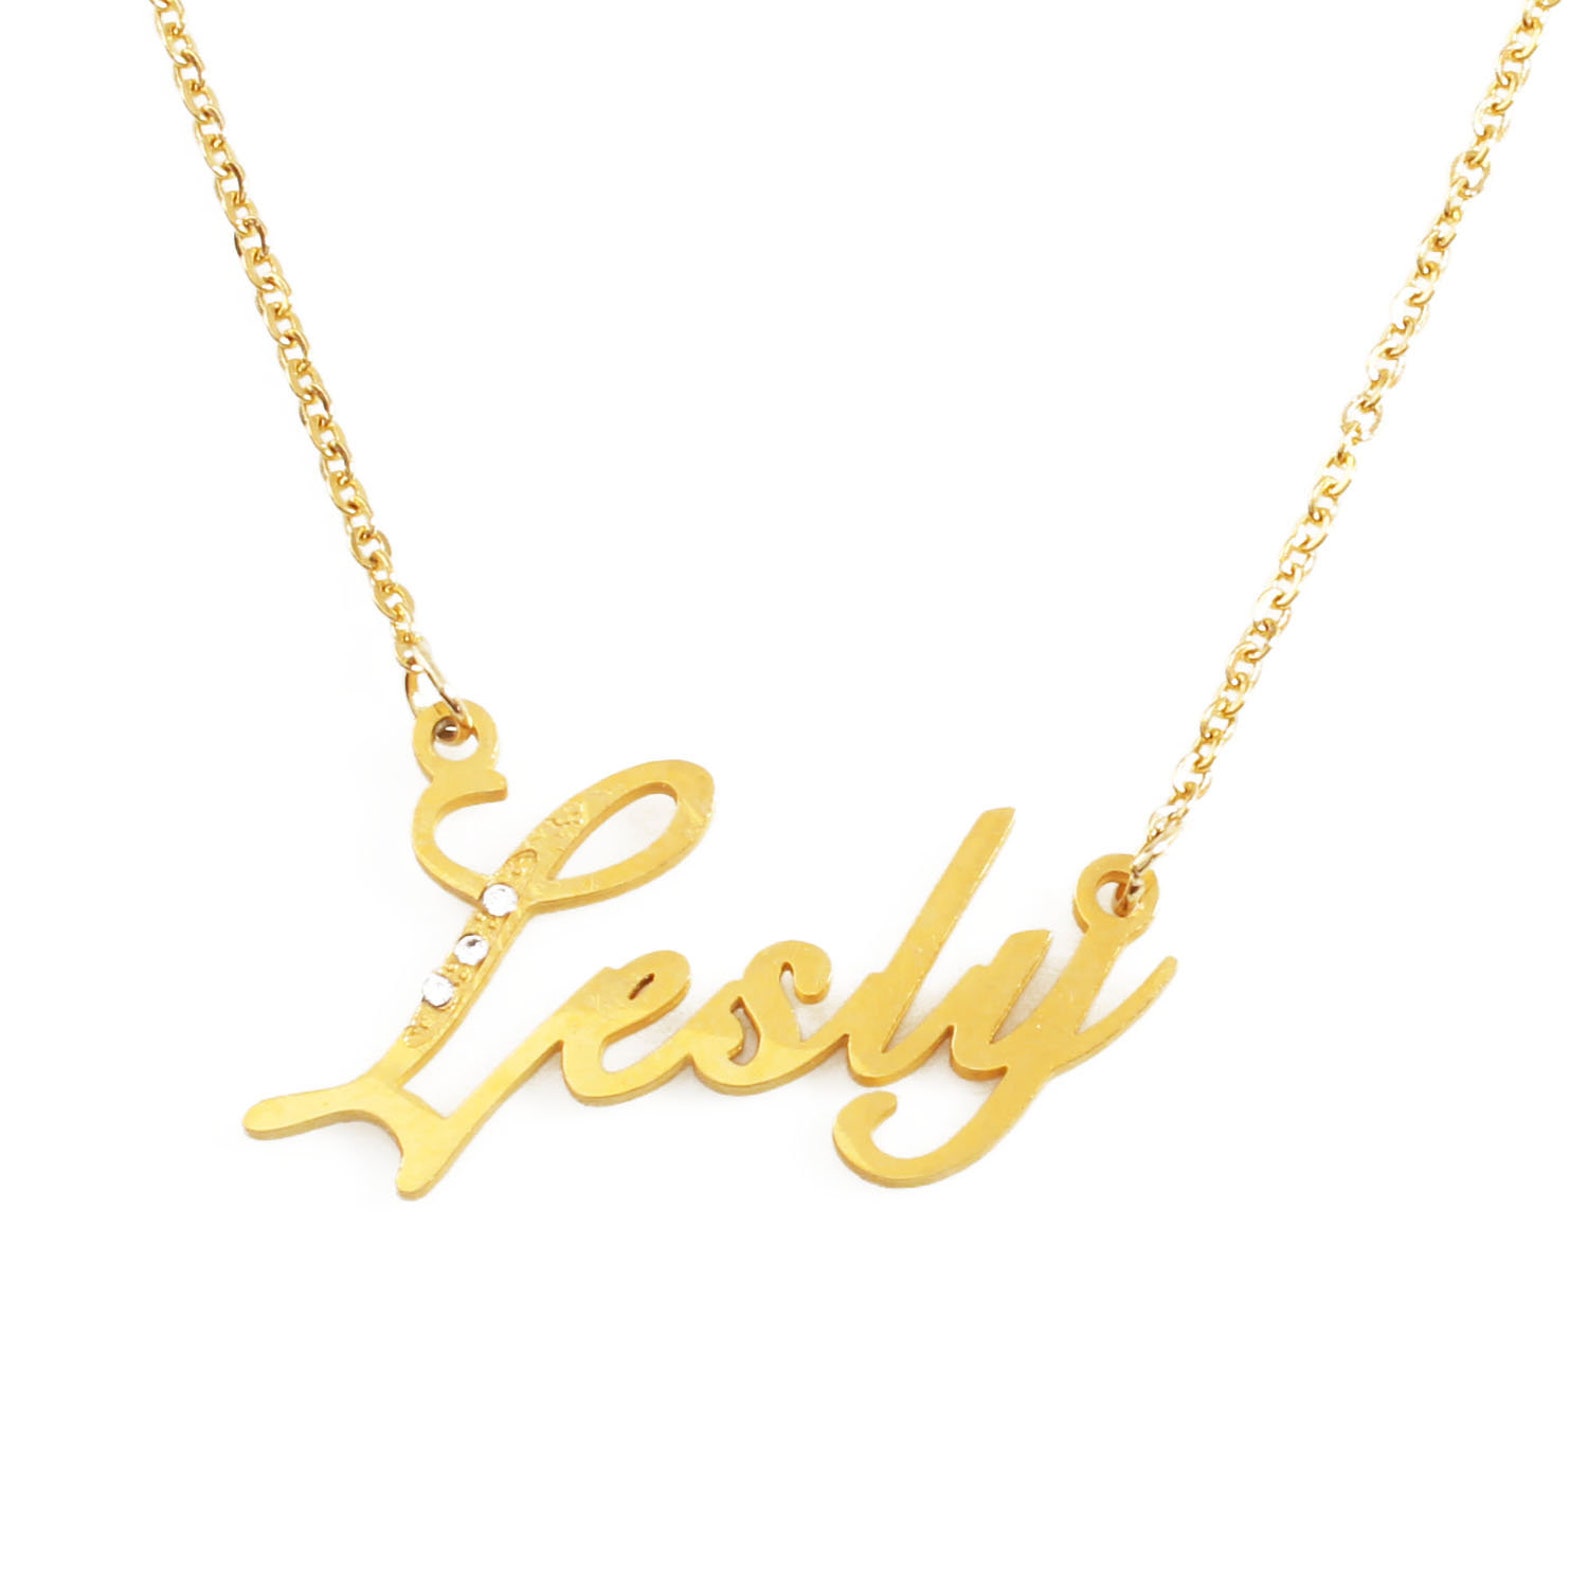 LESLY Gold Tone Name Necklace With Crystals Personalized | Etsy